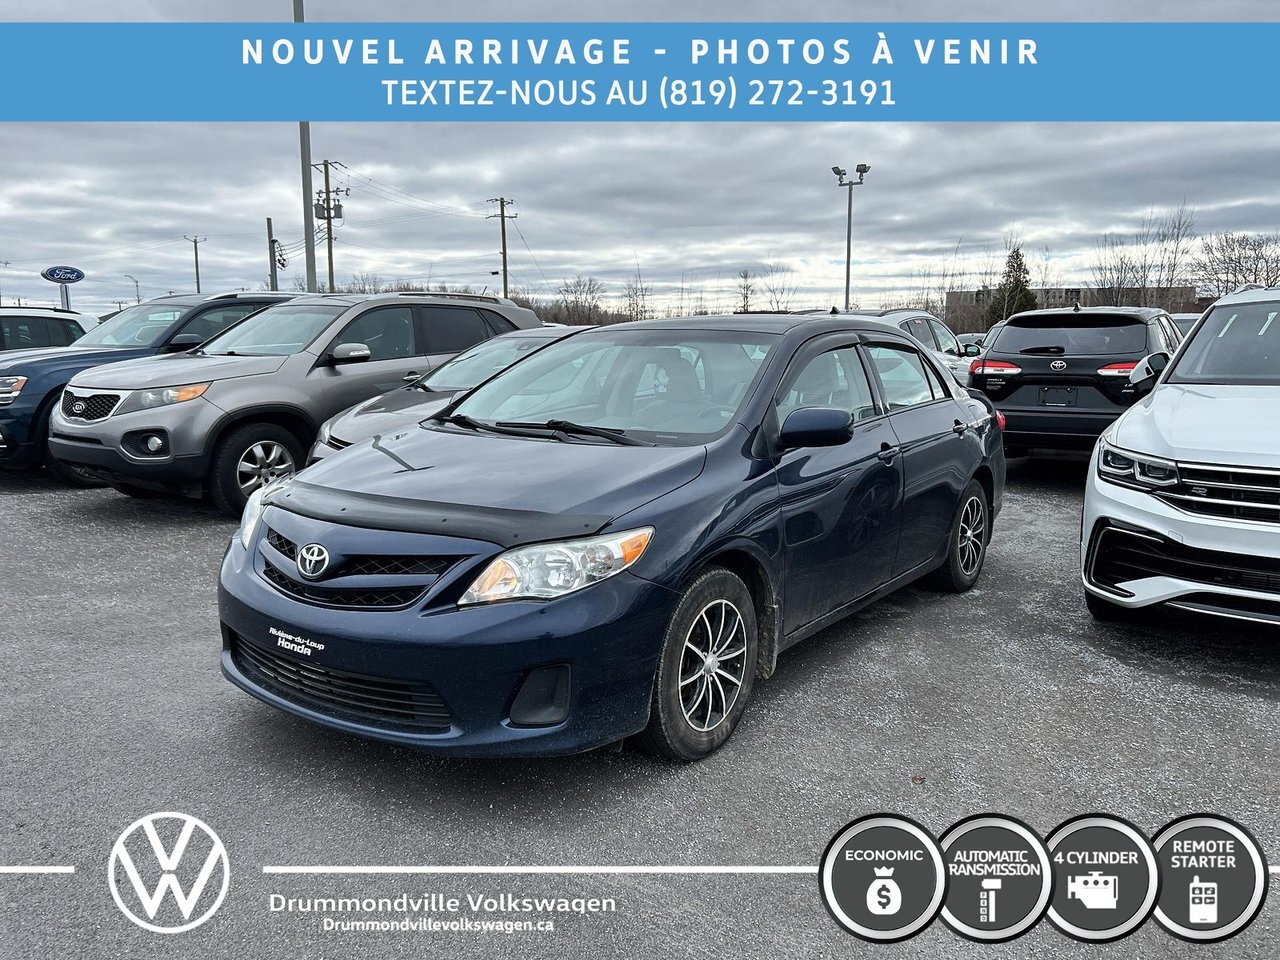 2013 Toyota Corolla CE + CLIMATISATION + SIEGES CHAUFFANTS + 